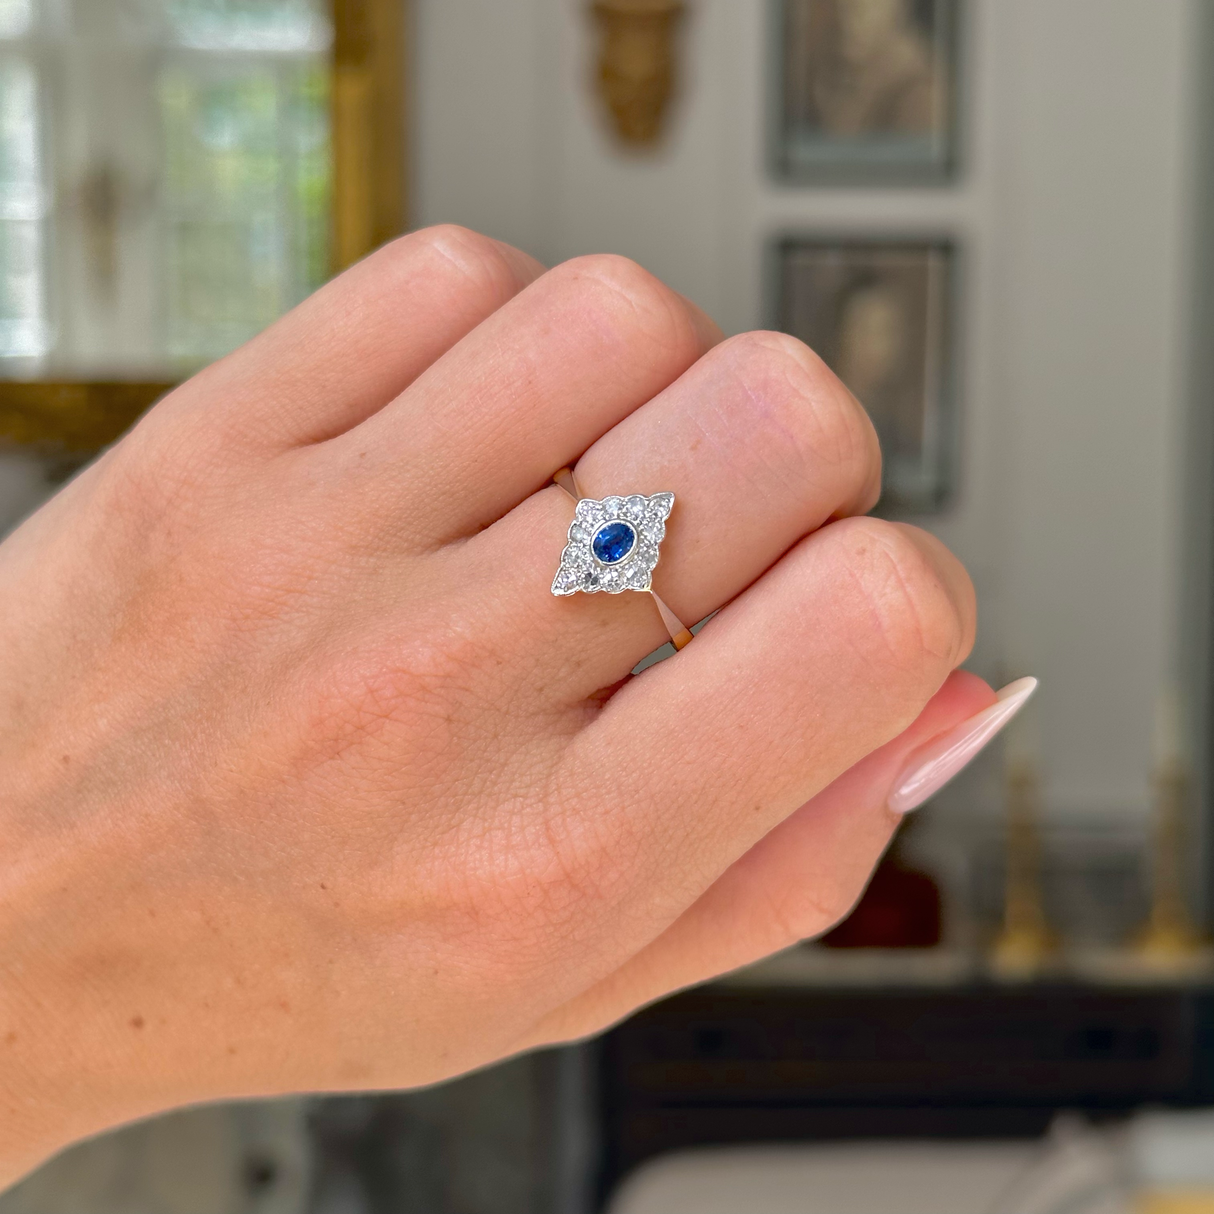 antique edwardian sapphire and diamond kite shaped ring, worn on closed hand, front view